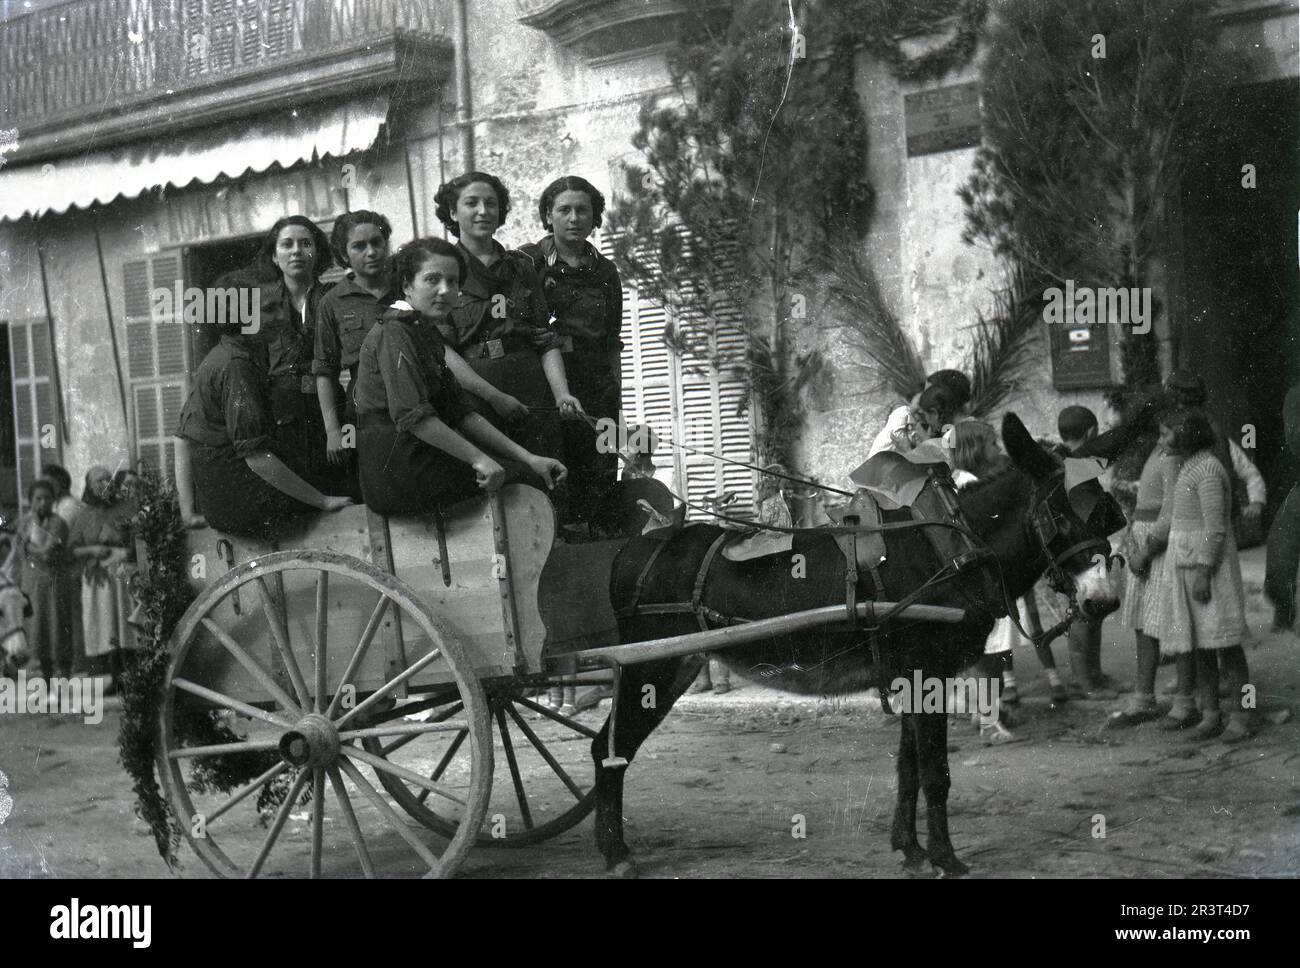 Historical image from the beginning of the 20th century, Porreres, Majorca, Spain. Stock Photo